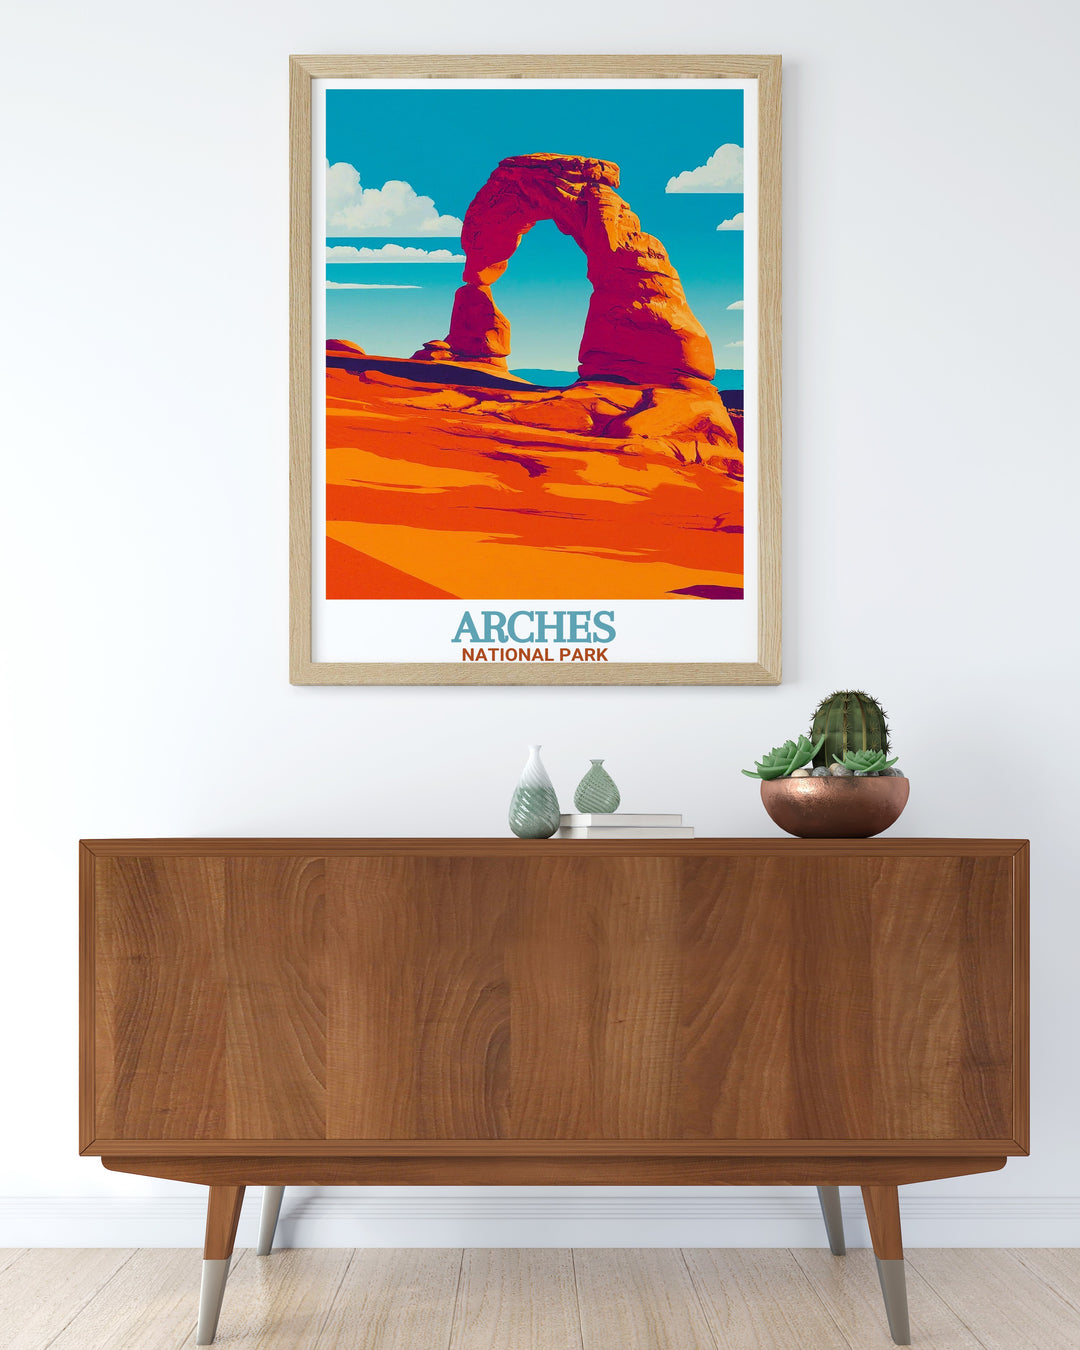 Beautiful Delicate Arch print capturing the breathtaking landscape of Arches National Park perfect for home decor or as a special gift for friends and family who appreciate National Park art and the great outdoors.